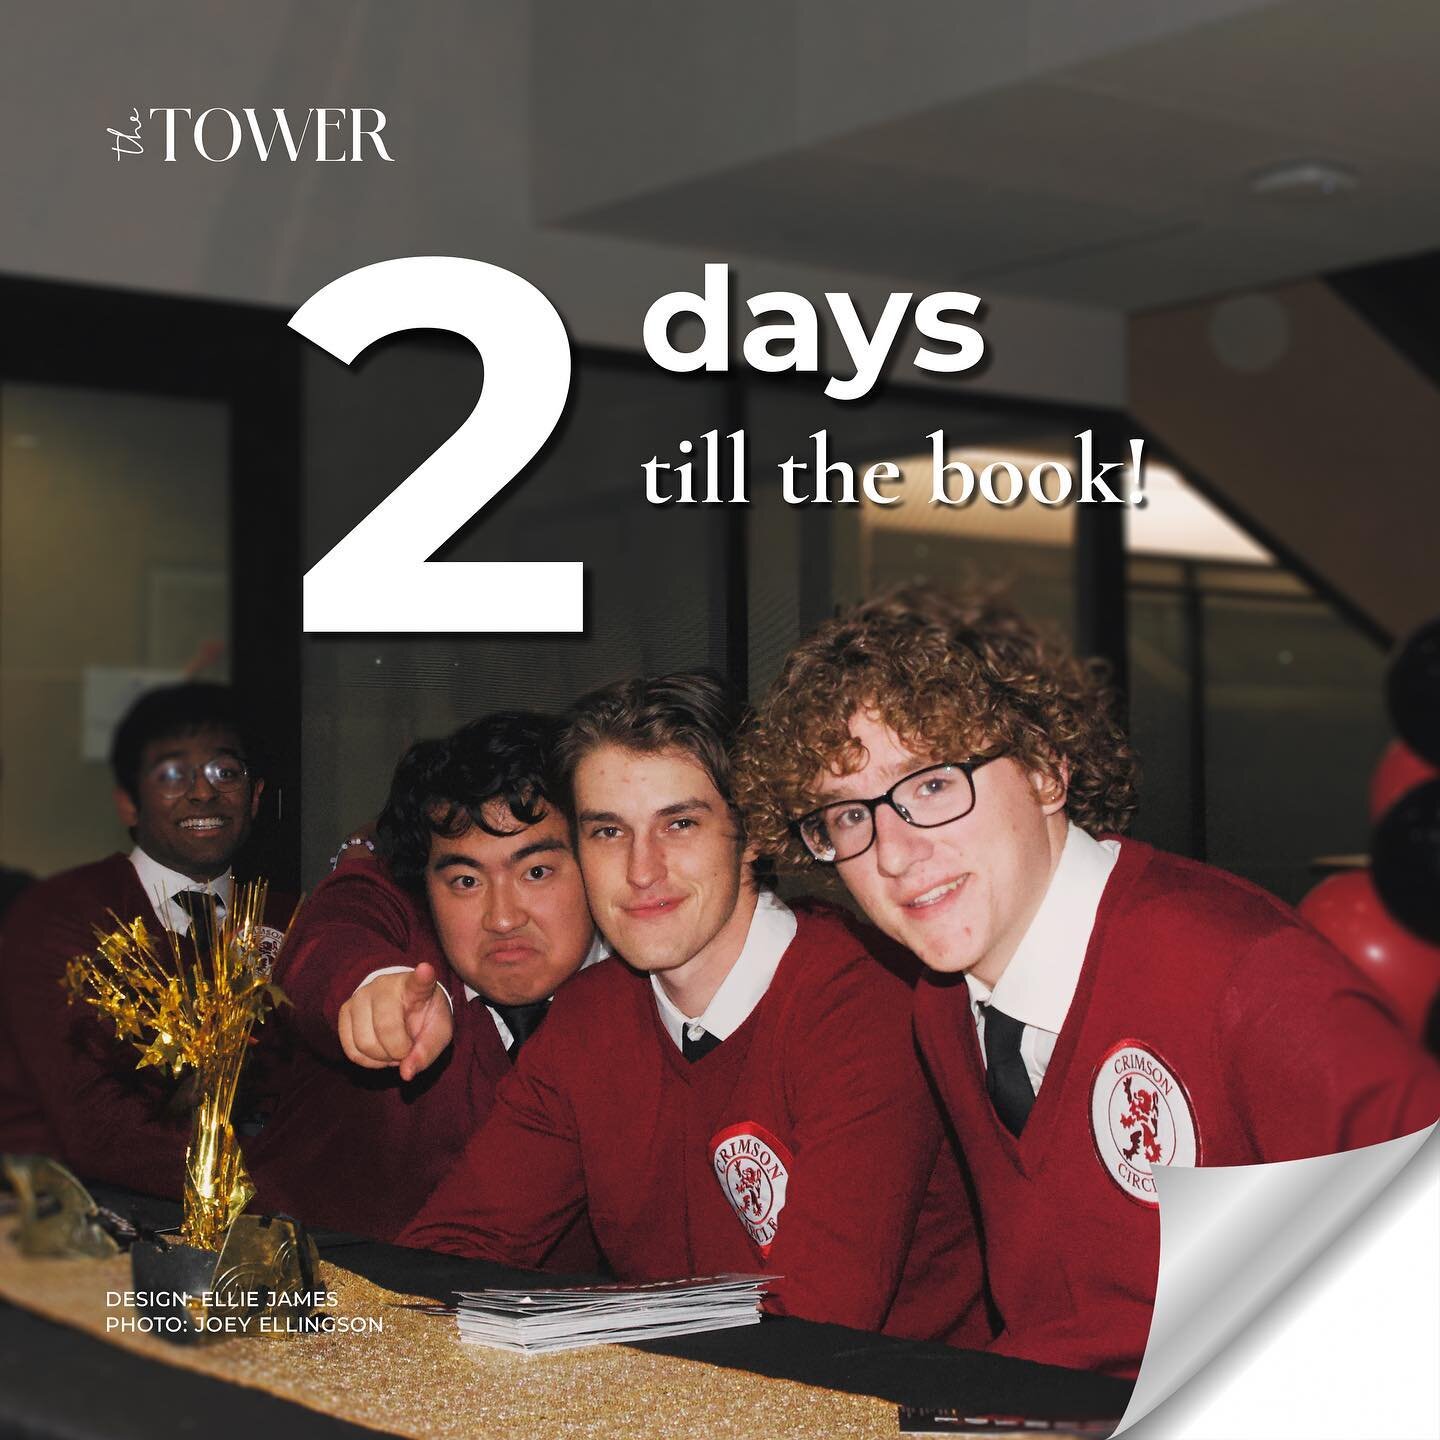 It&rsquo;s almost time! Just 2 days until the 2023 Tower Yearbook reveal! Don&rsquo;t miss out on our distribution dates!

Photo: Joey Ellingson | Tower

For more information about distribution, visit our website or click on our linktr.ee in our bio!